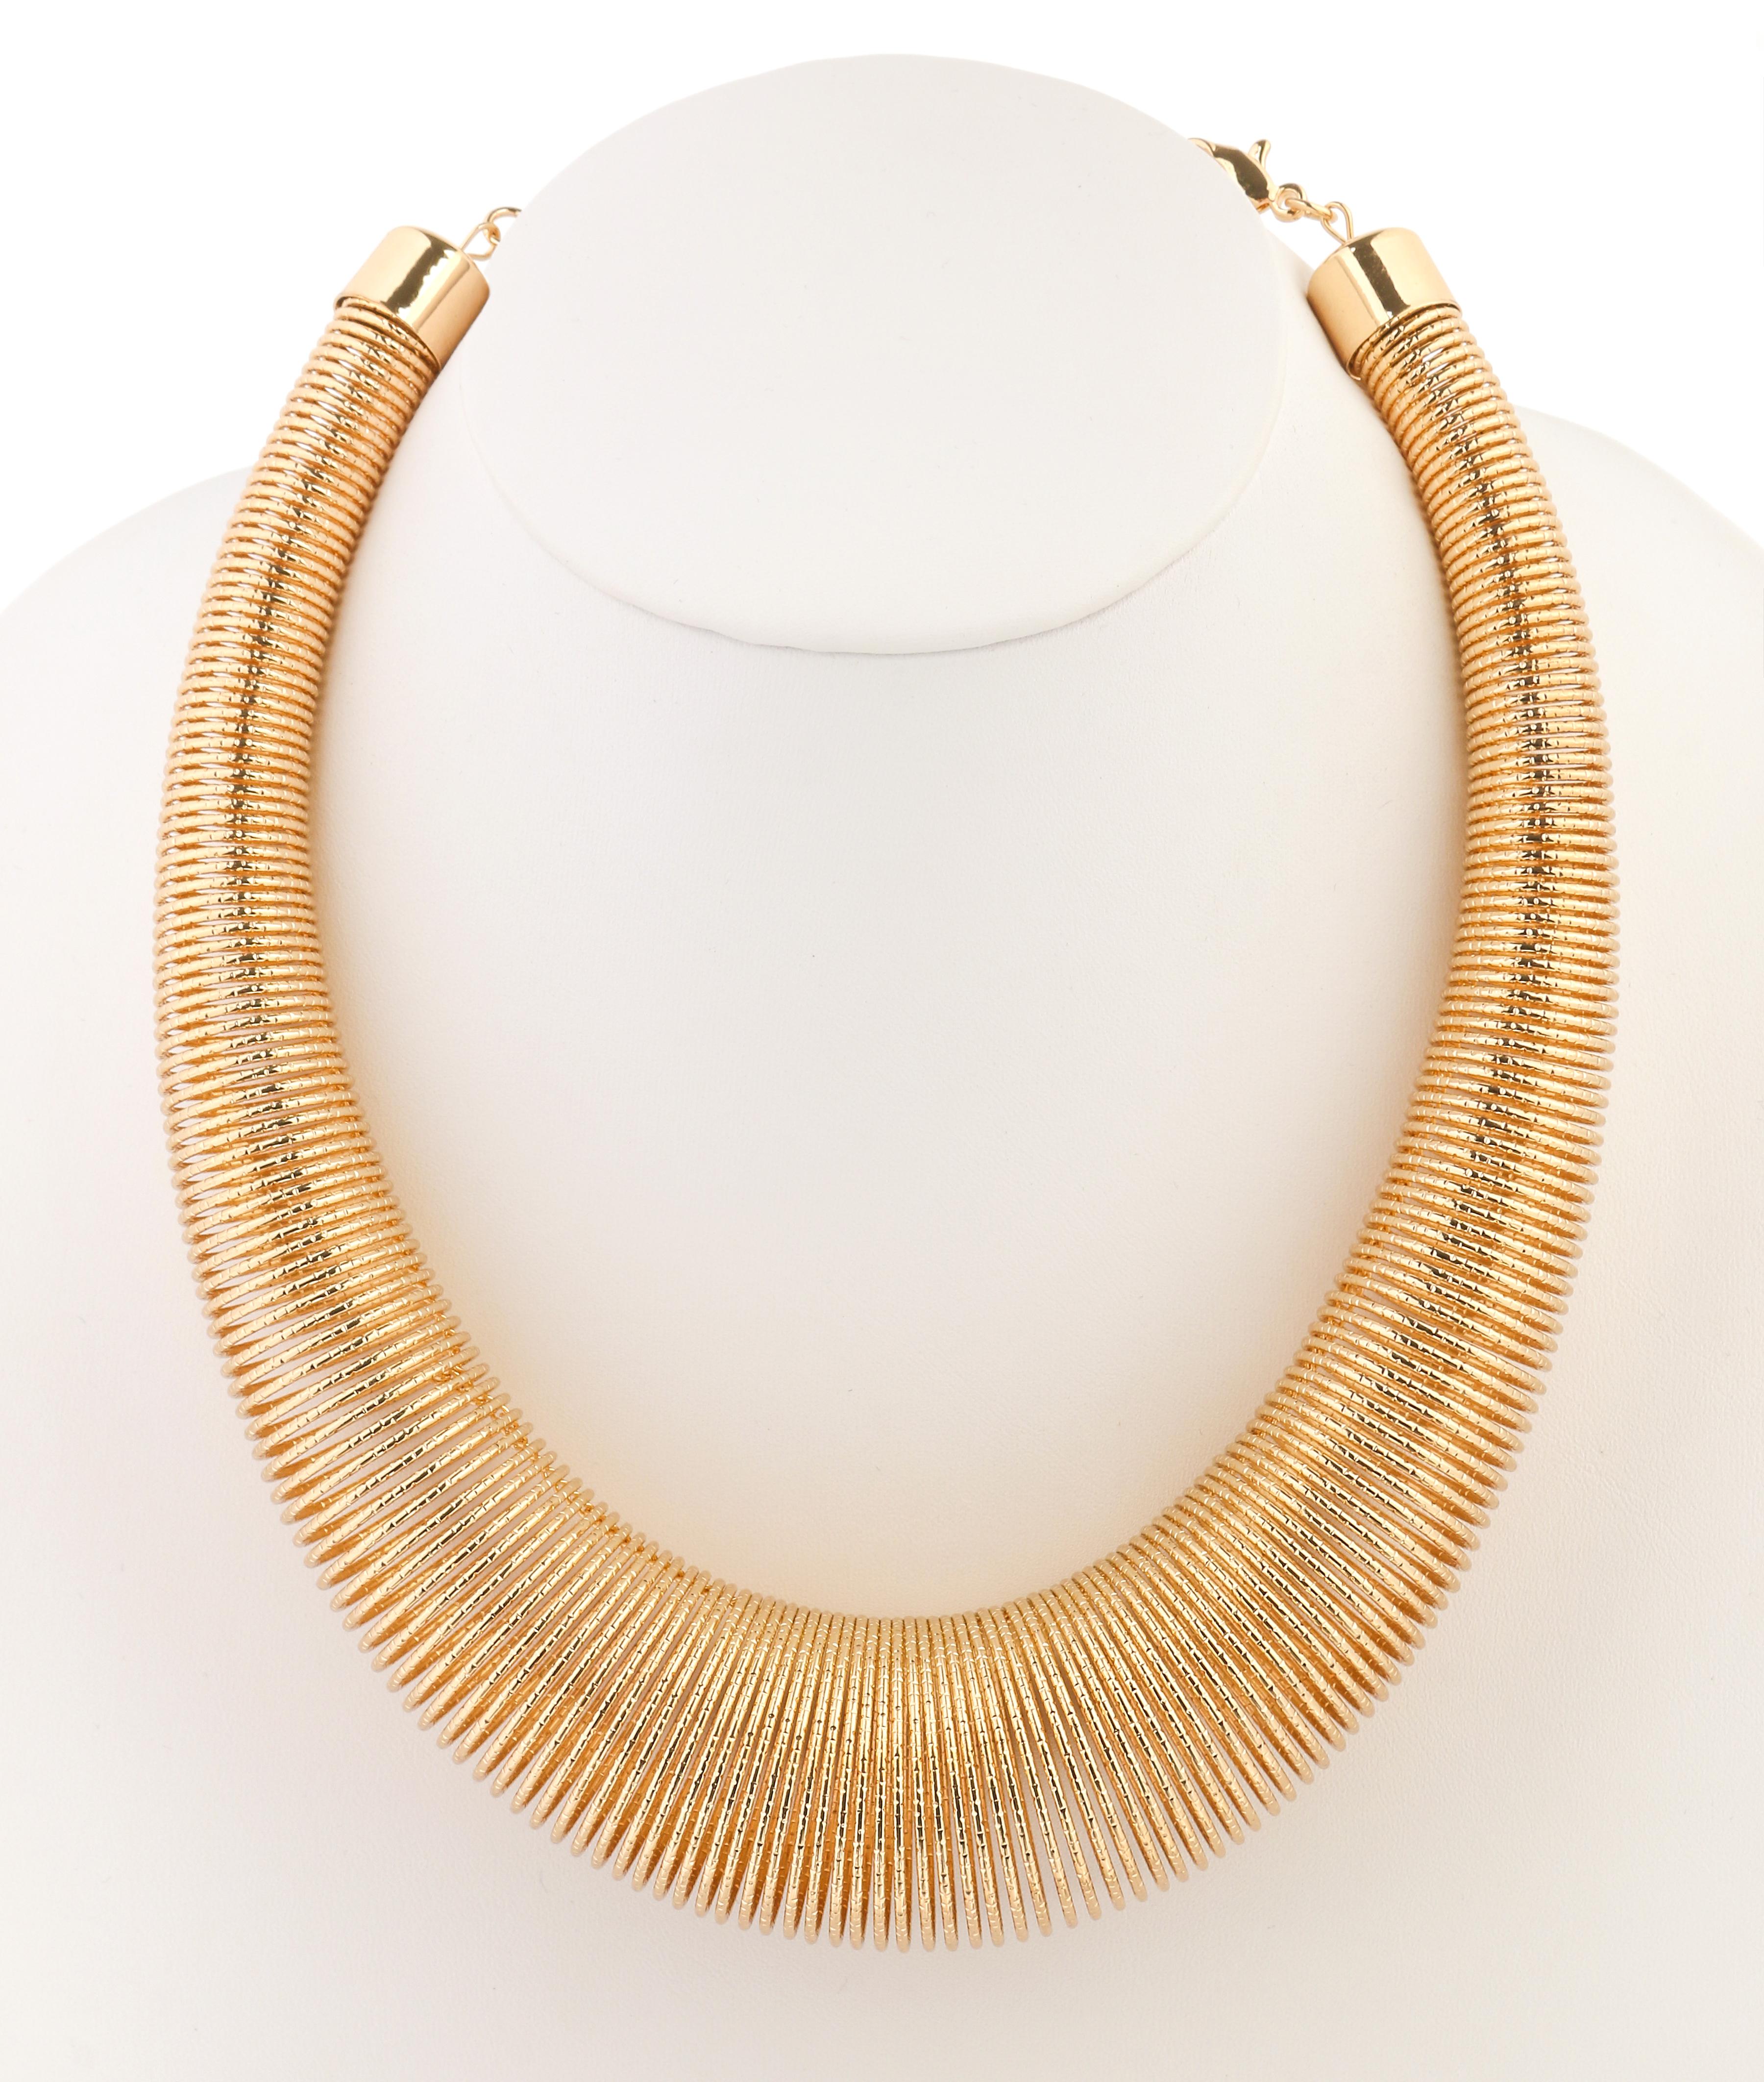 Vintage c.1980's Versace designed by Ugo Correani new old stock gold coil necklace. Large gold tone hammered metal spiraling coil body (approximately measuring 1.4